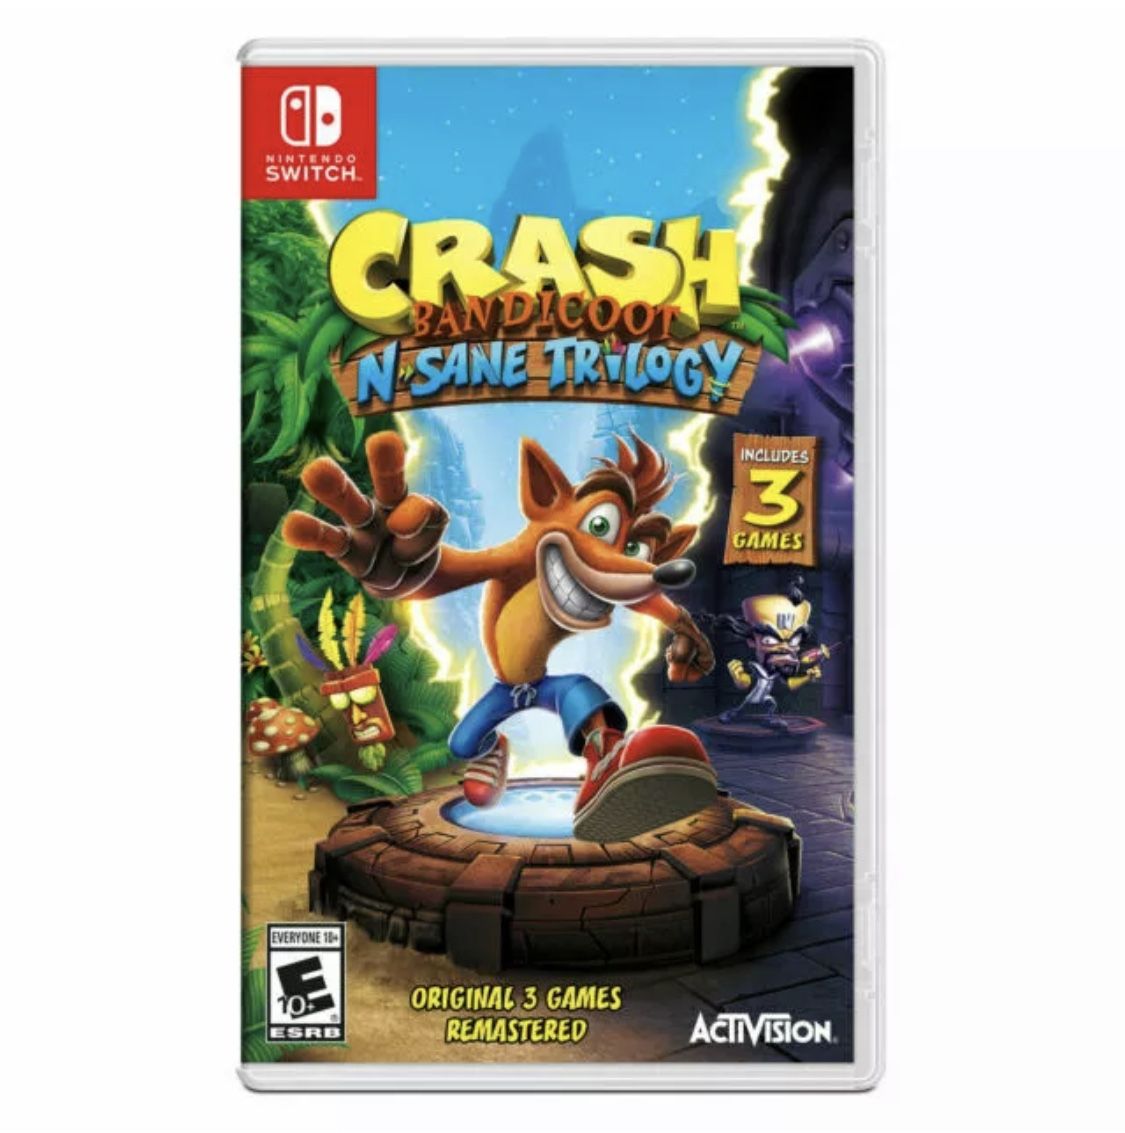 Crash Bandicoot N-Sane Trilogy Switch Video Game (like Mario) for Kids & Adults, 3 Games in 1